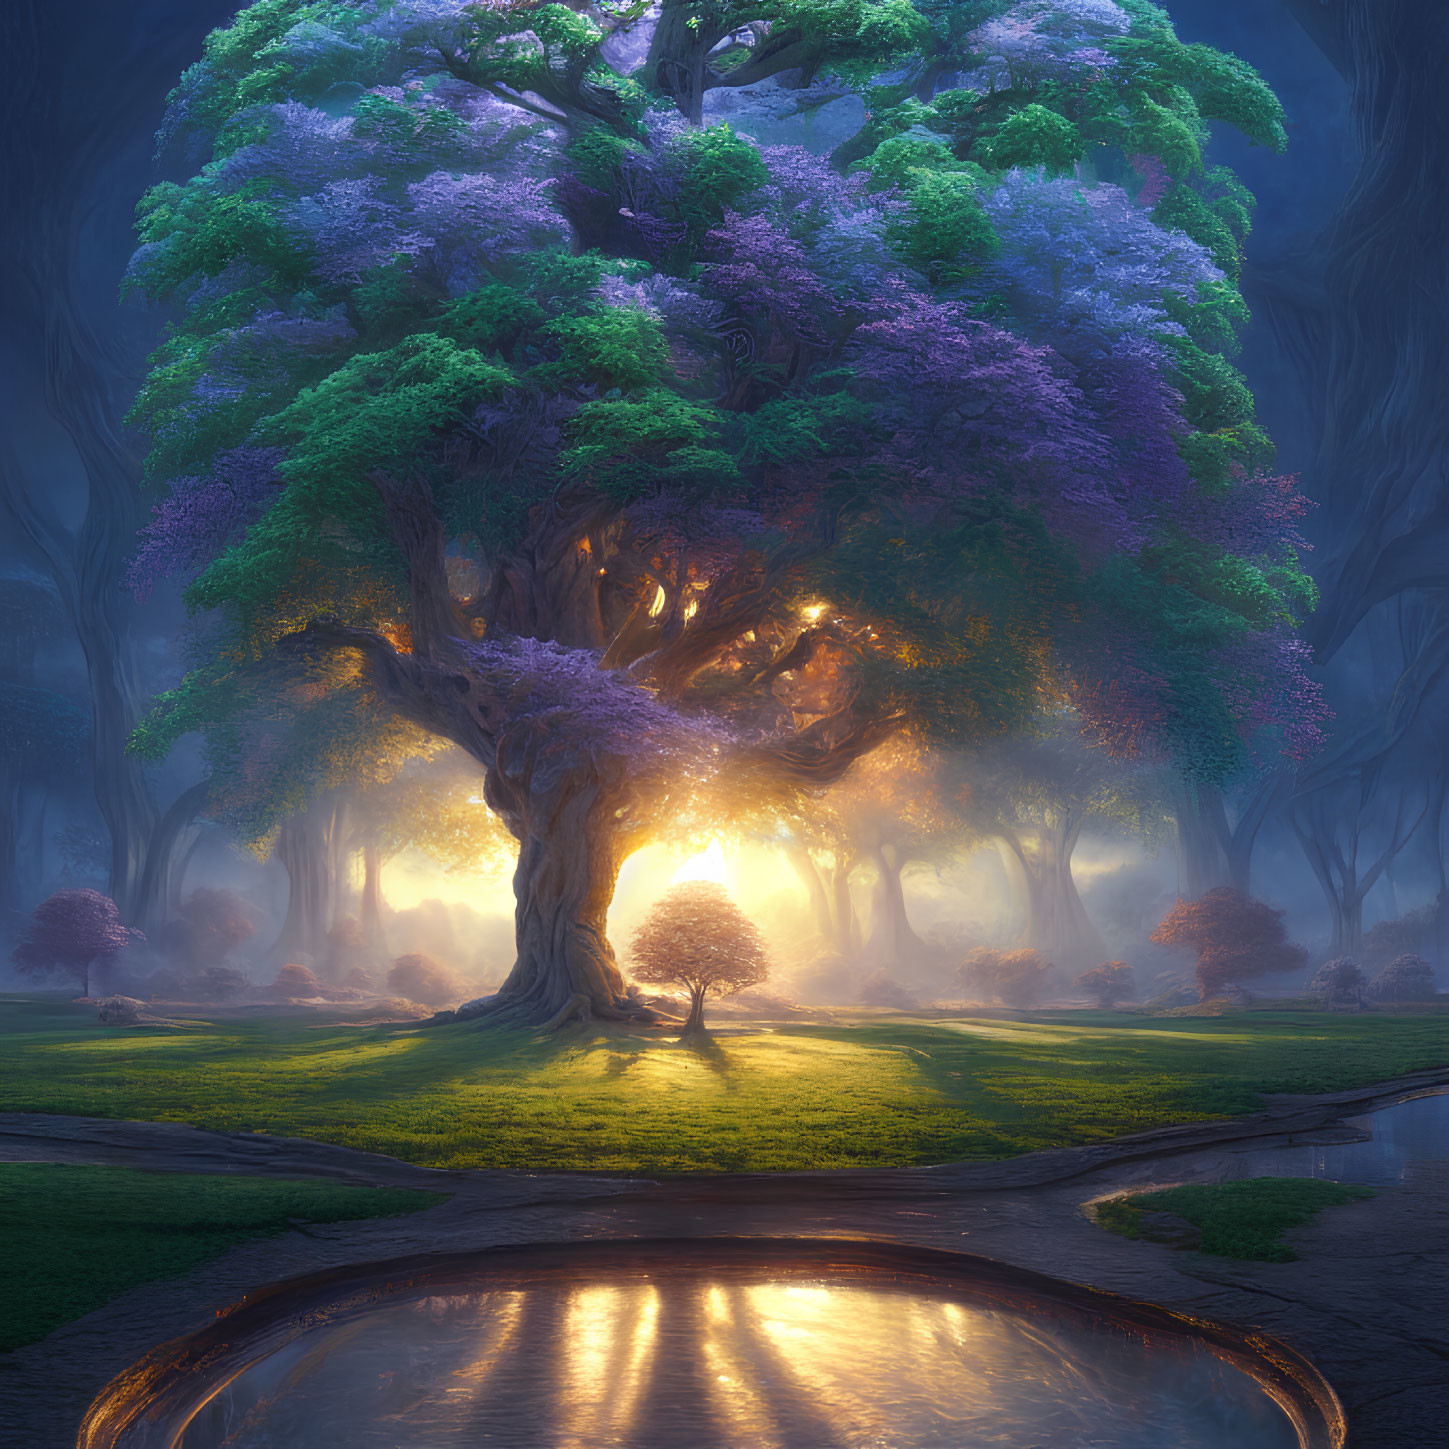 Majestic tree with purple and green foliage in tranquil grove